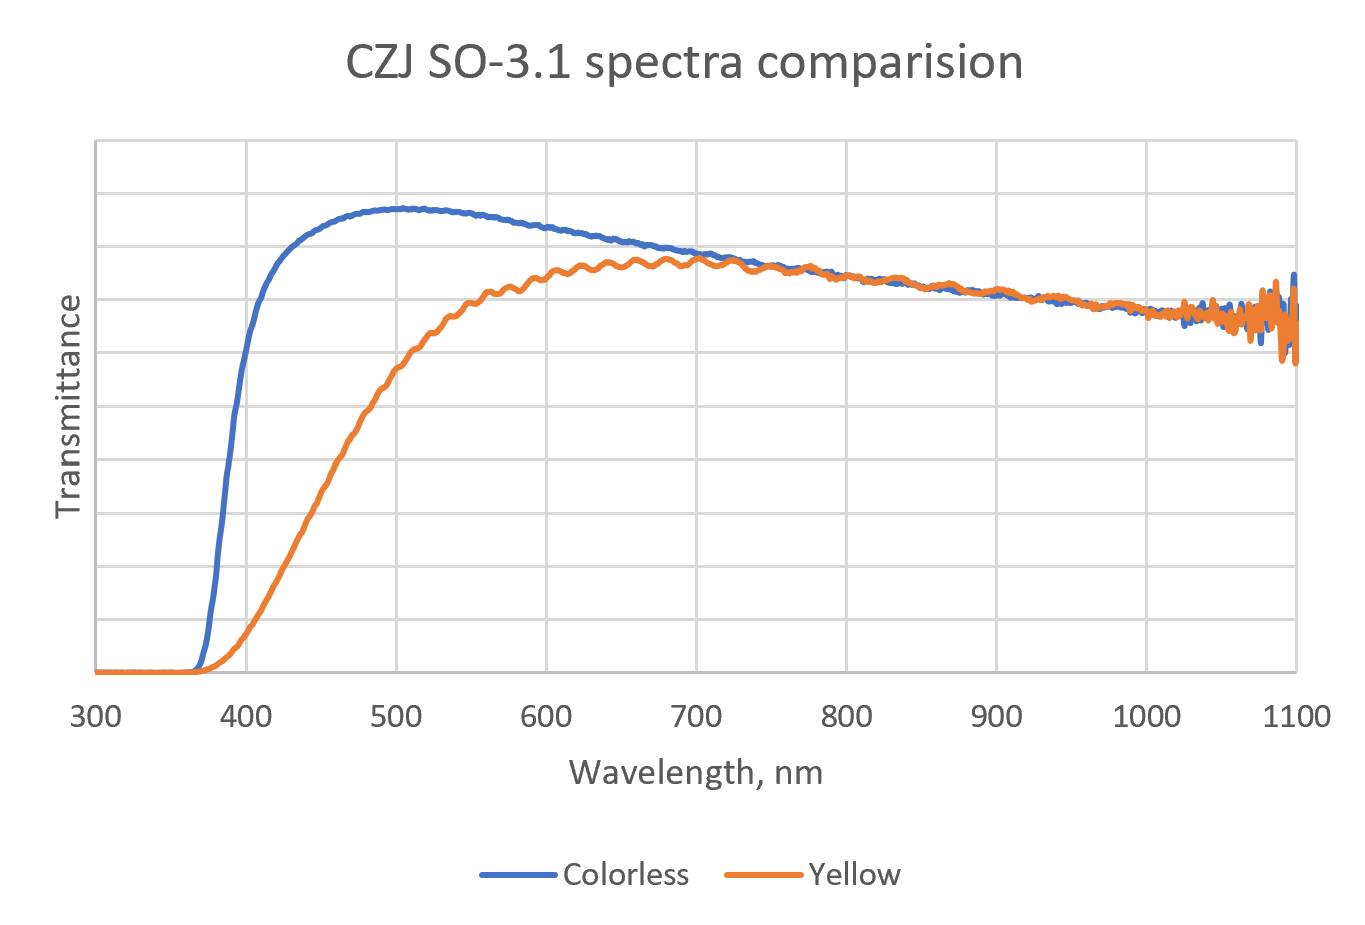 Transmission spectra for yellowed (Yellow) and colorless (Colorless) SO-3.1 objectives, recorded under equal conditions on a Varian Carry 300 spectrophotometer.